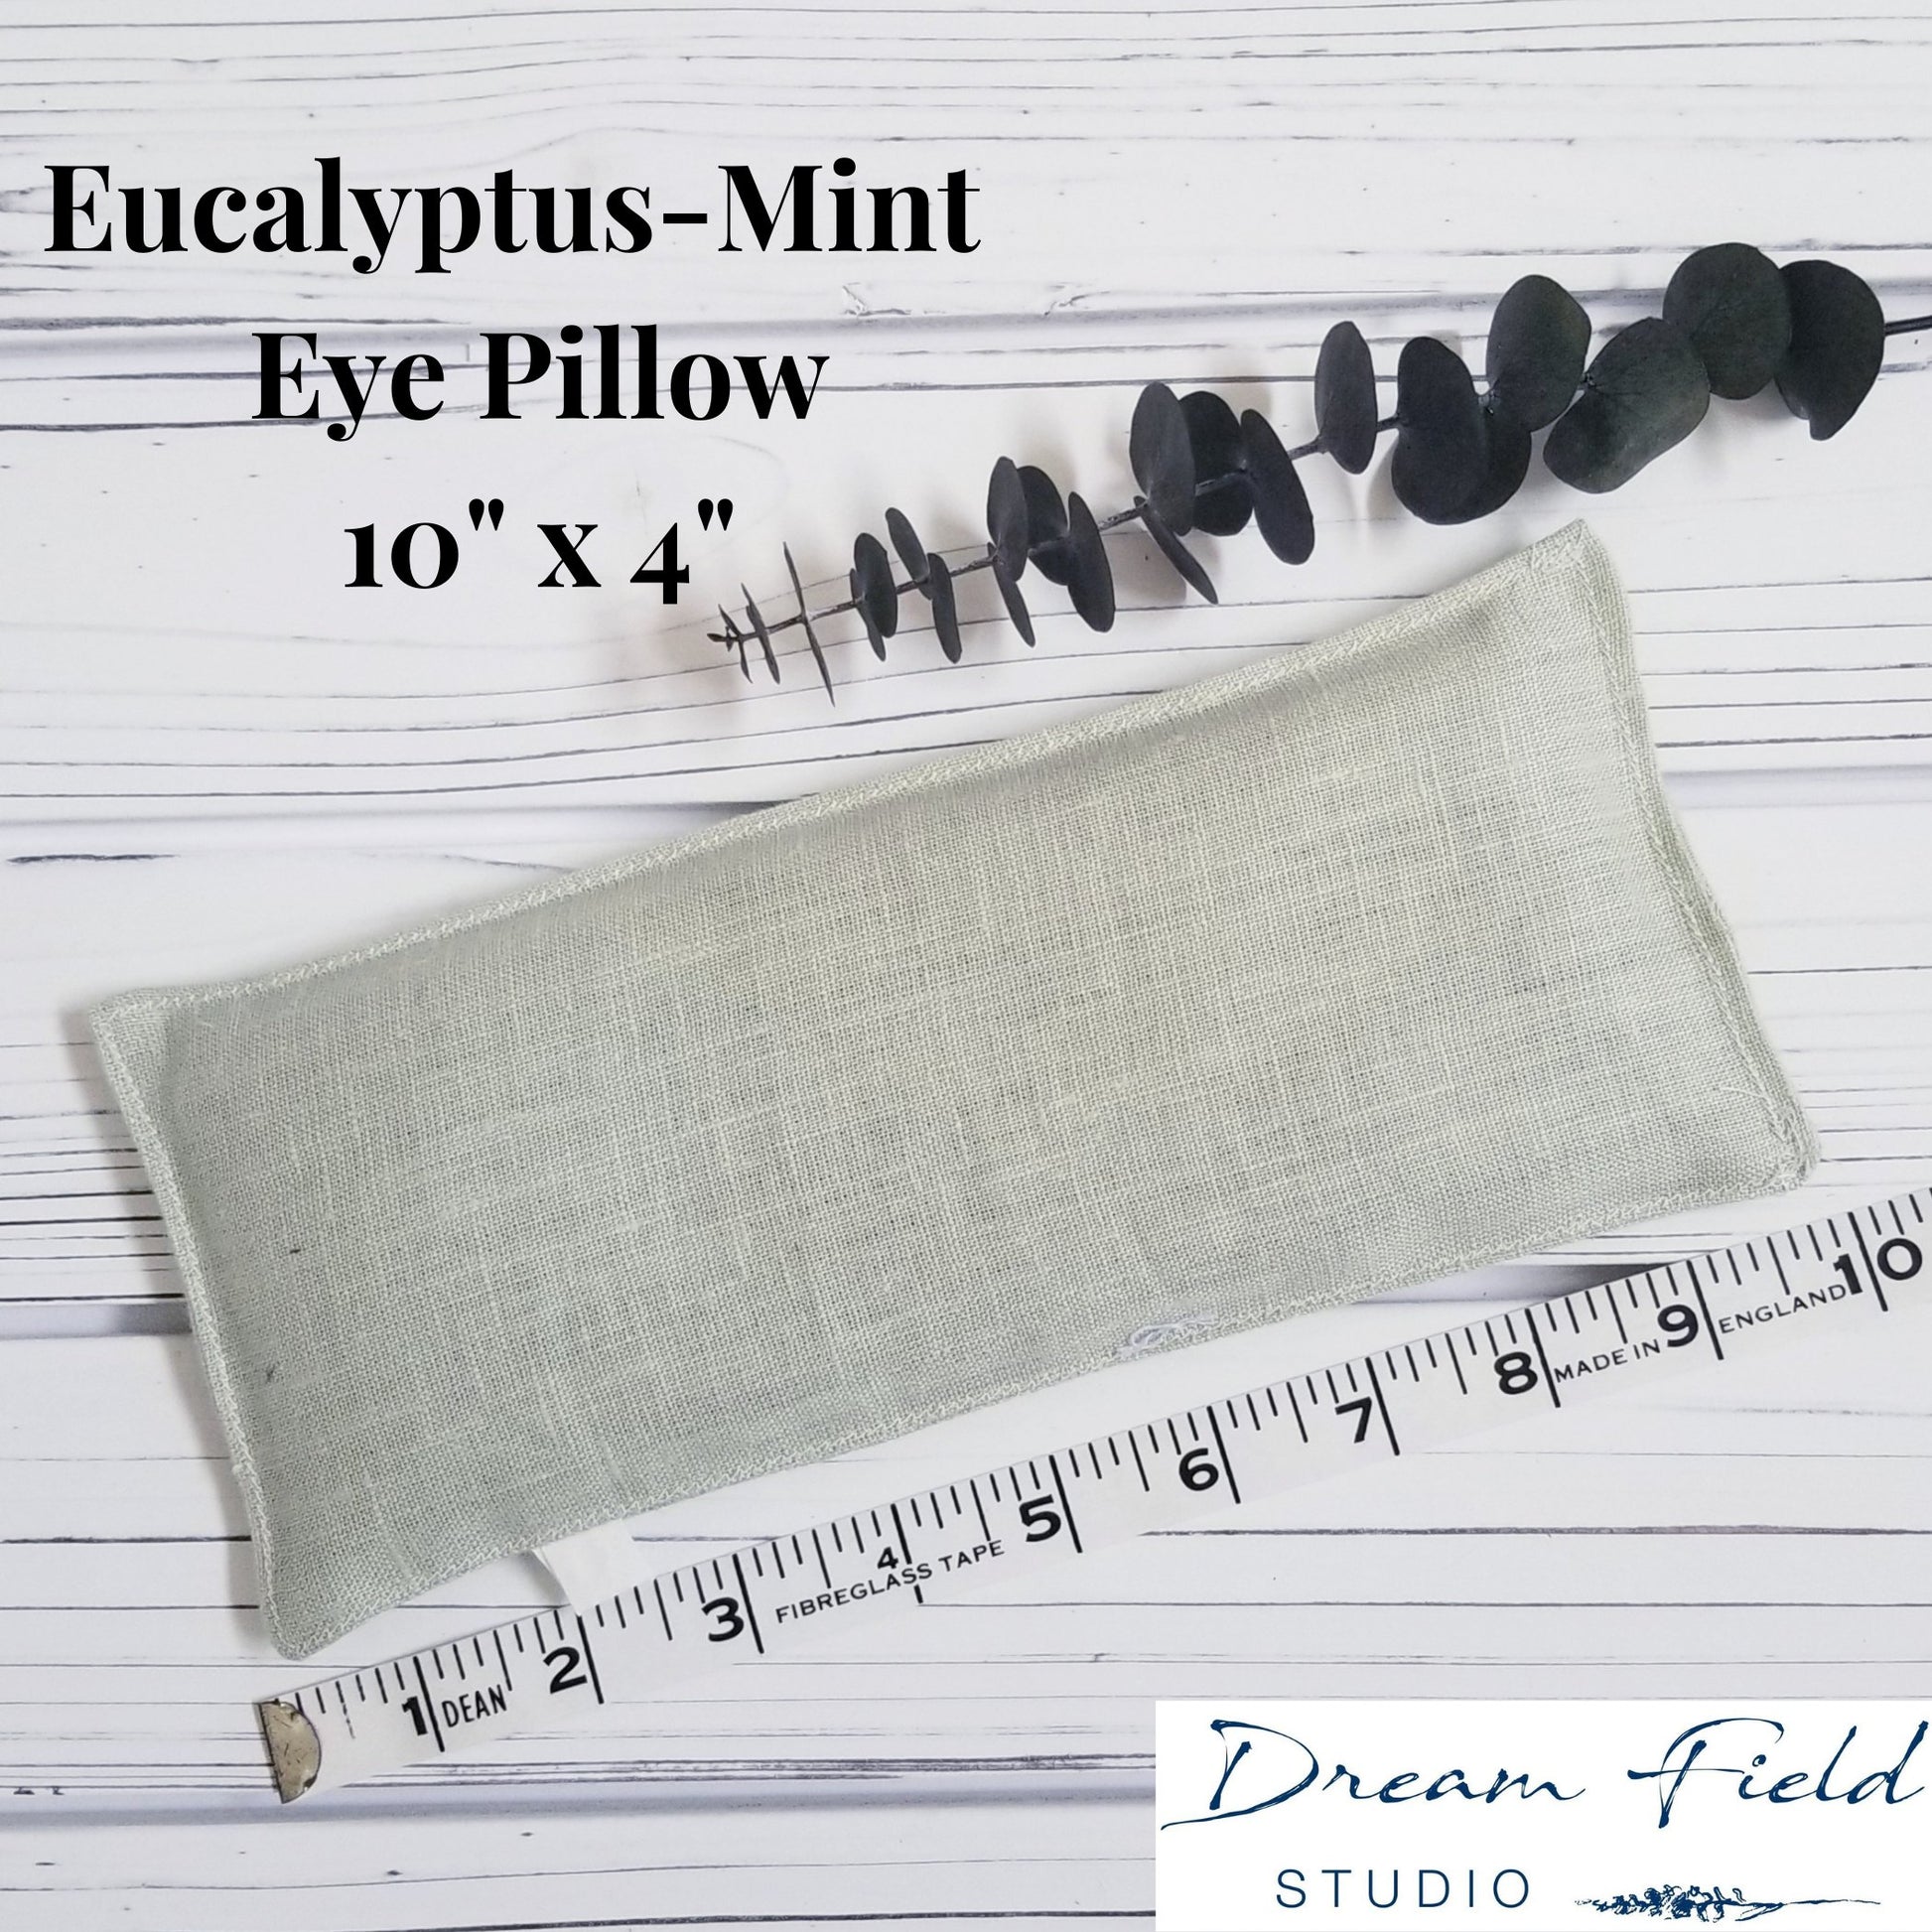 Size specifications for eye pillow